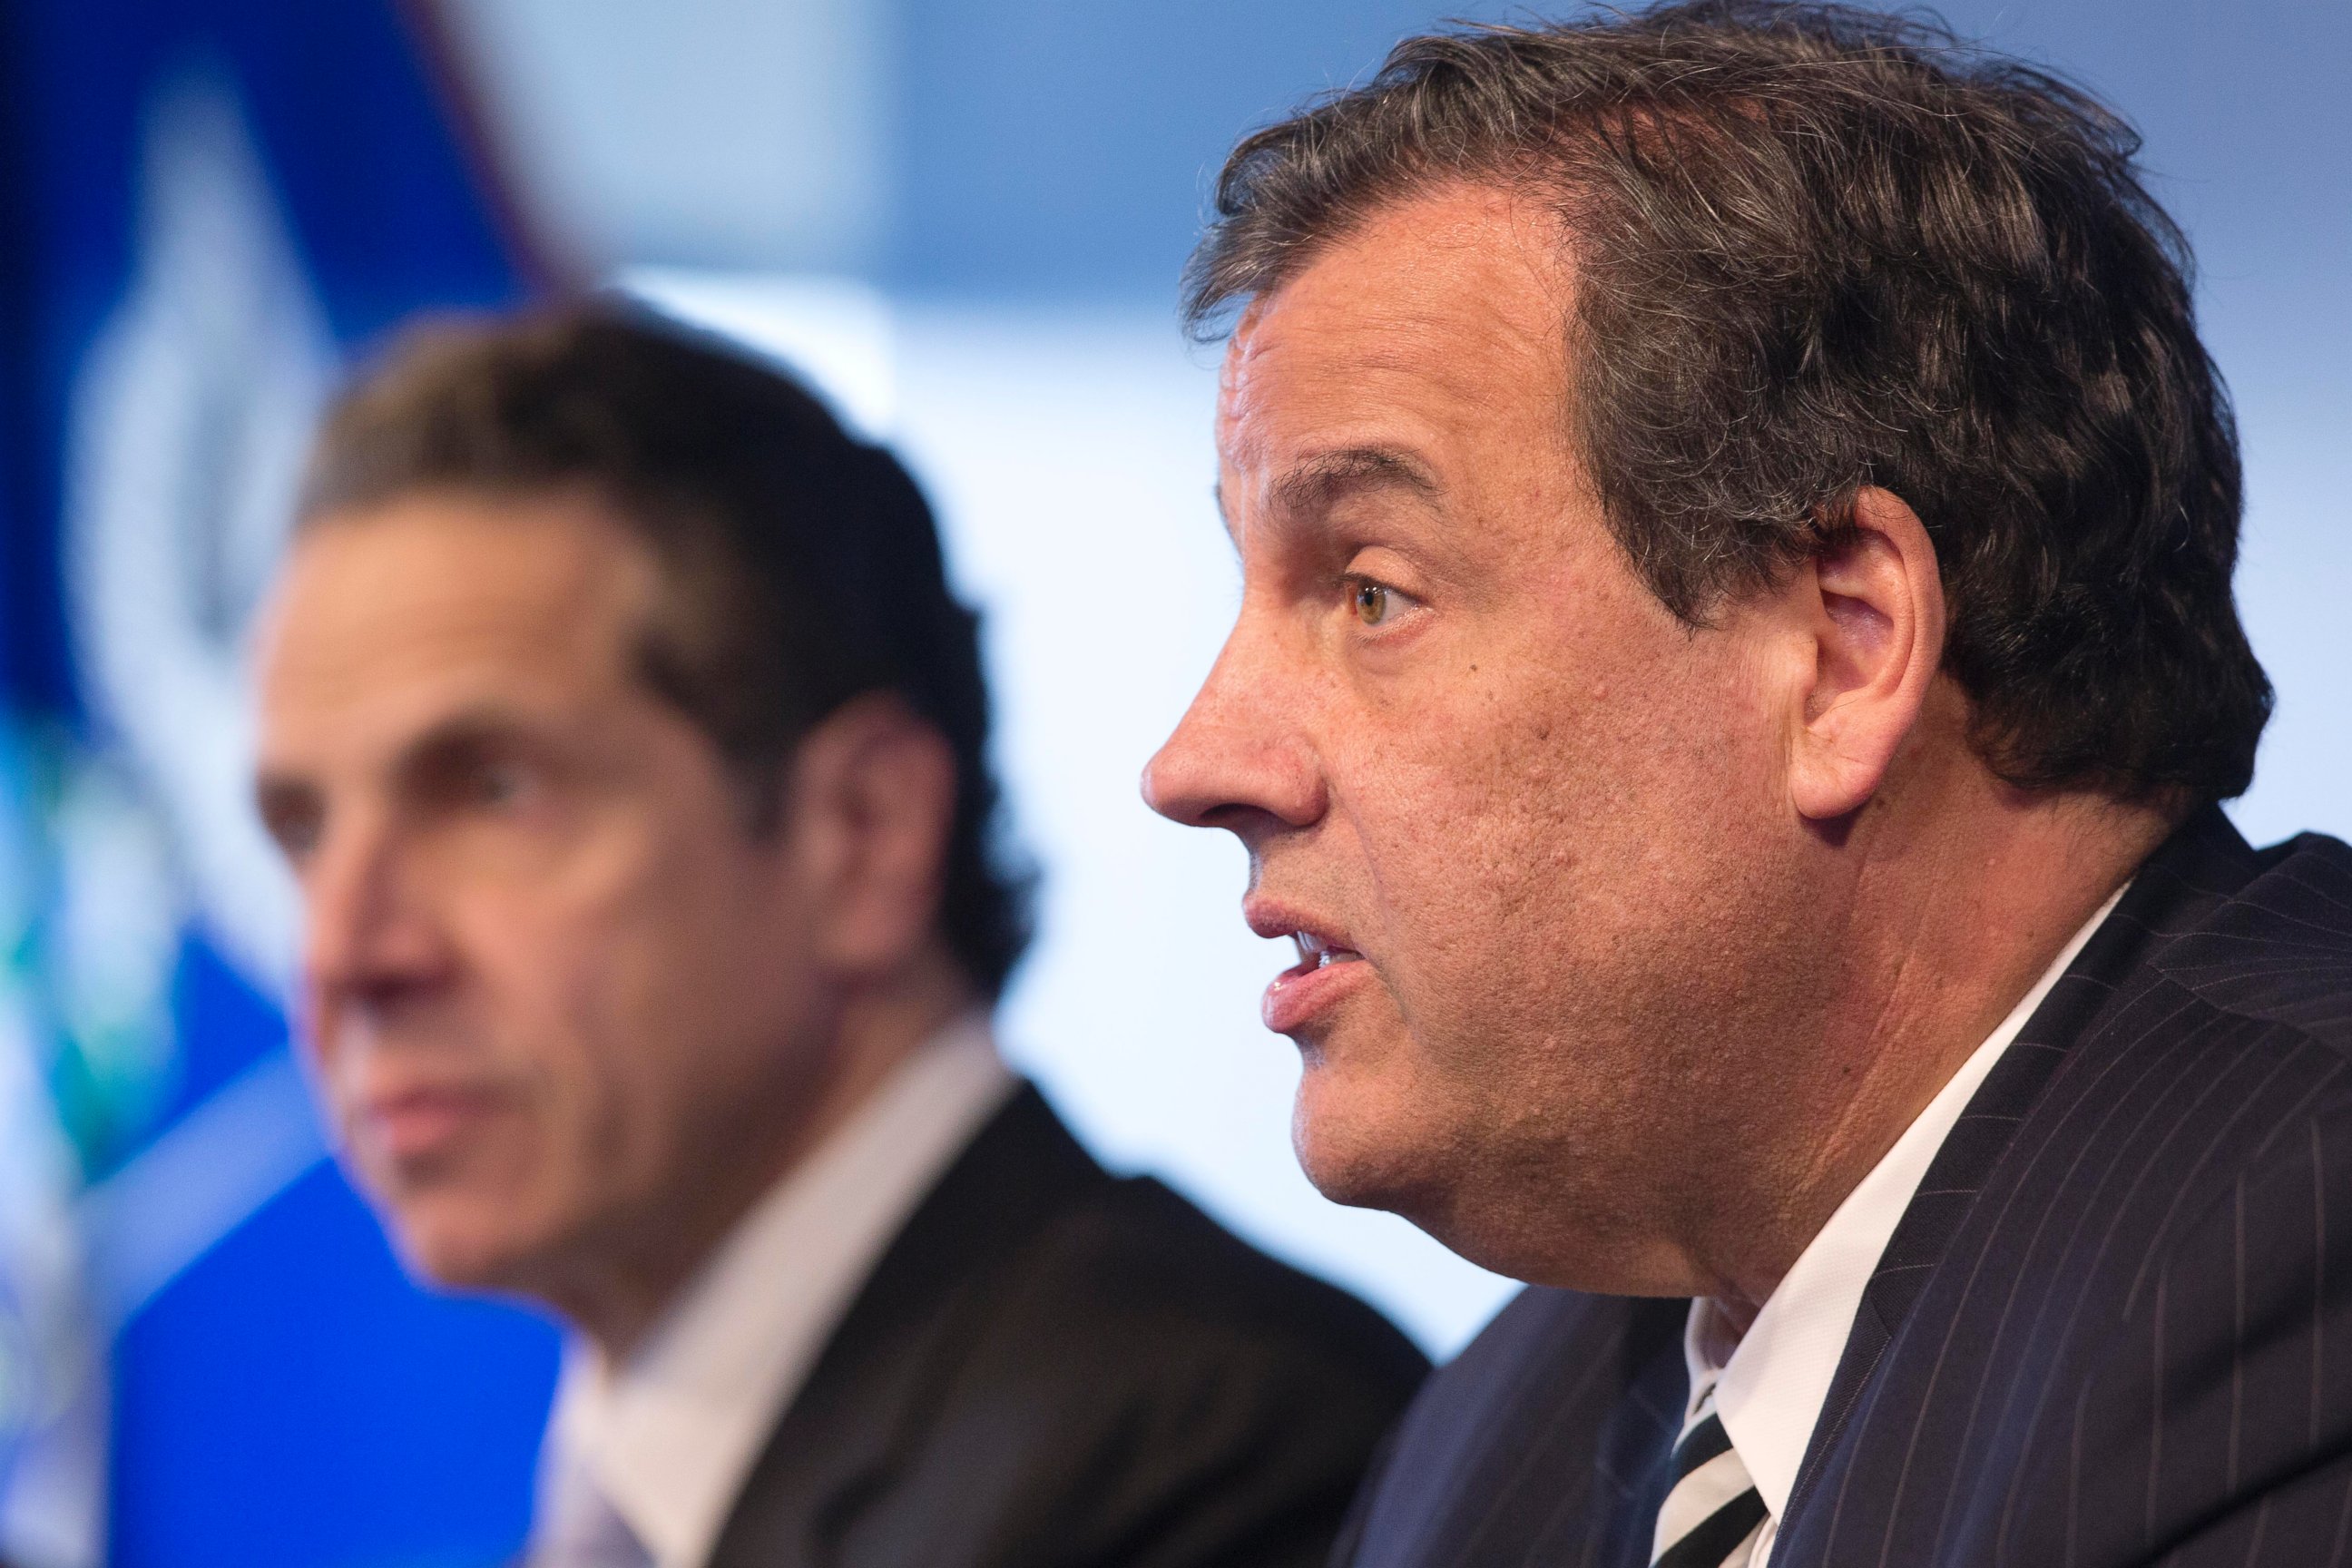 New York Governor Andrew Cuomo, left, listens as New Jersey Governor Chris Christie talks at a news conference, Oct. 24, 2014 in New York.